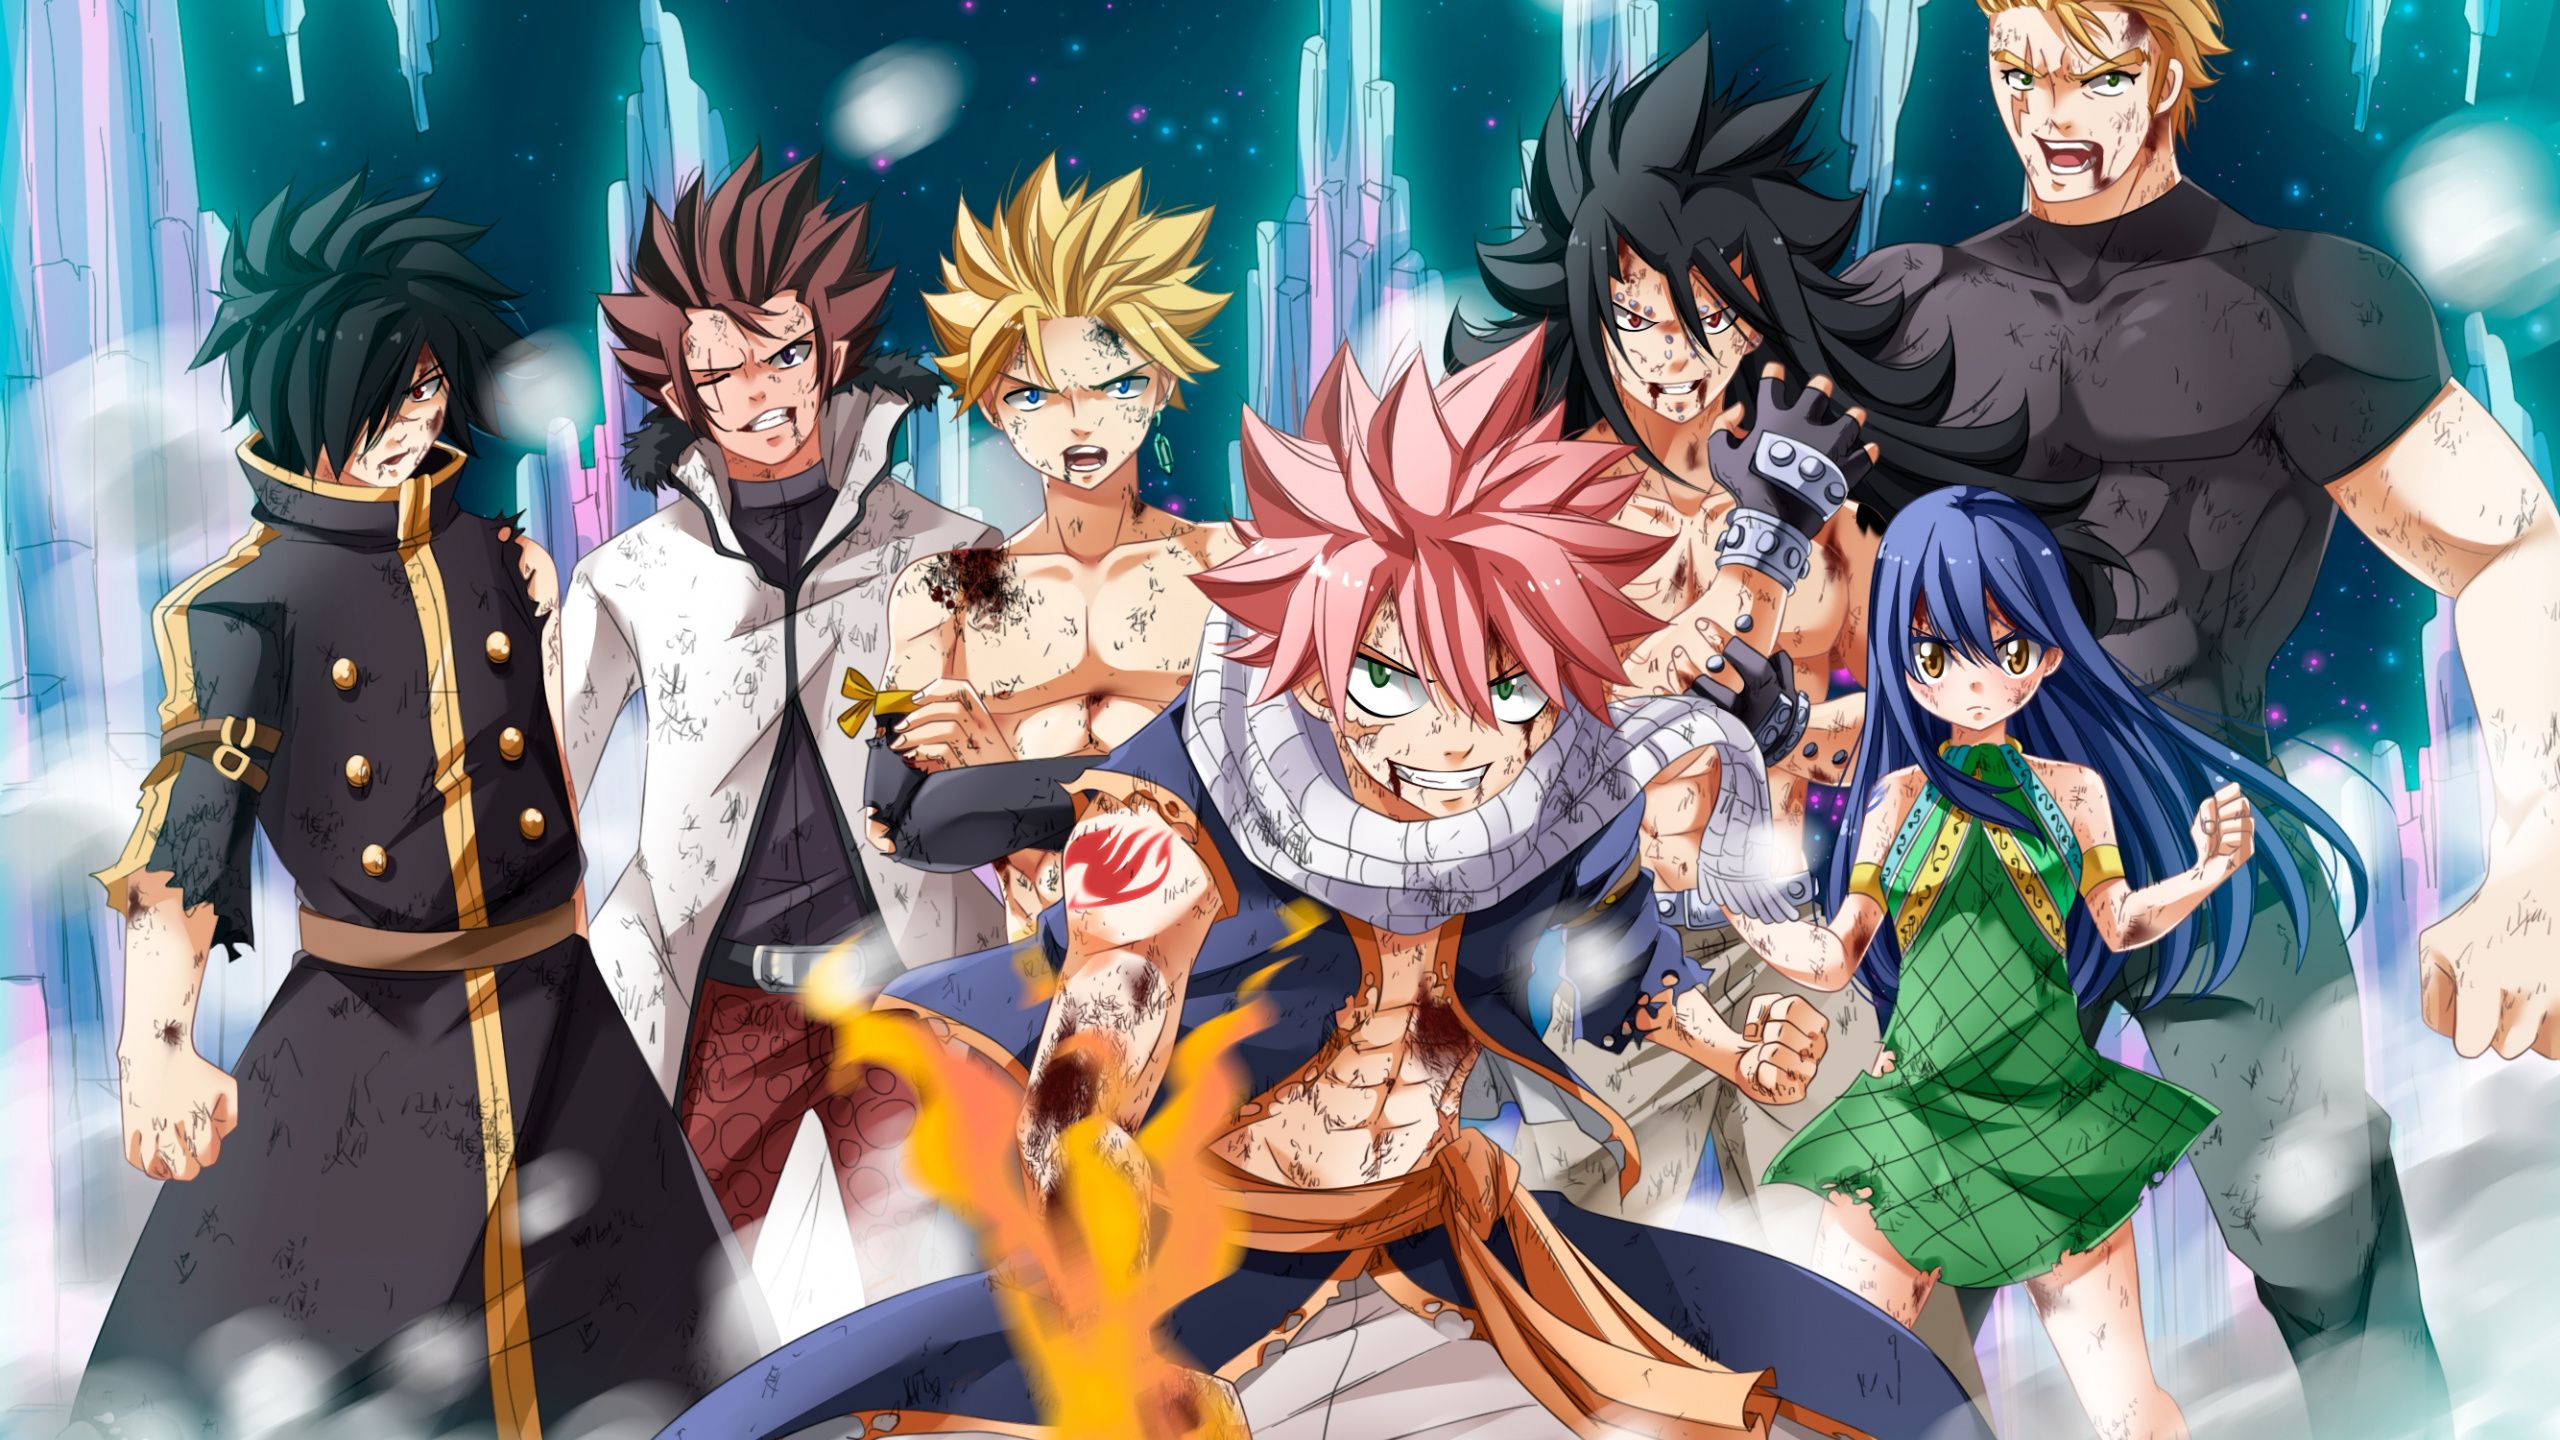 Download Anime, lead characters, Fairy Tail wallpaper, 2560x1440